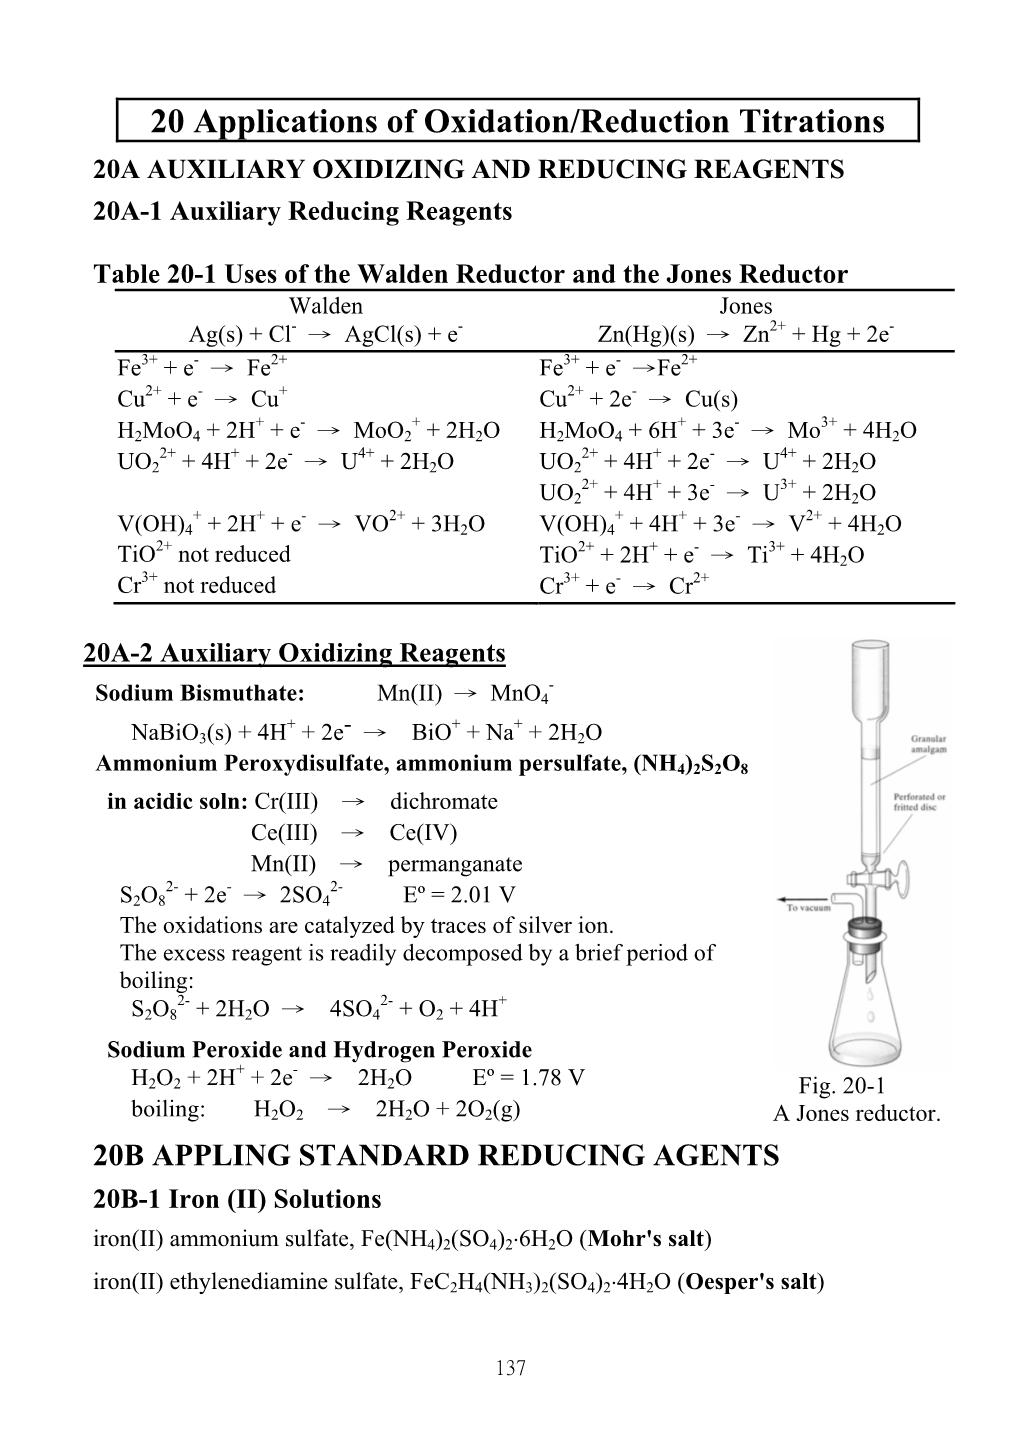 20 Applications of Oxidation/Reduction Titrations 20A AUXILIARY OXIDIZING and REDUCING REAGENTS 20A-1 Auxiliary Reducing Reagents